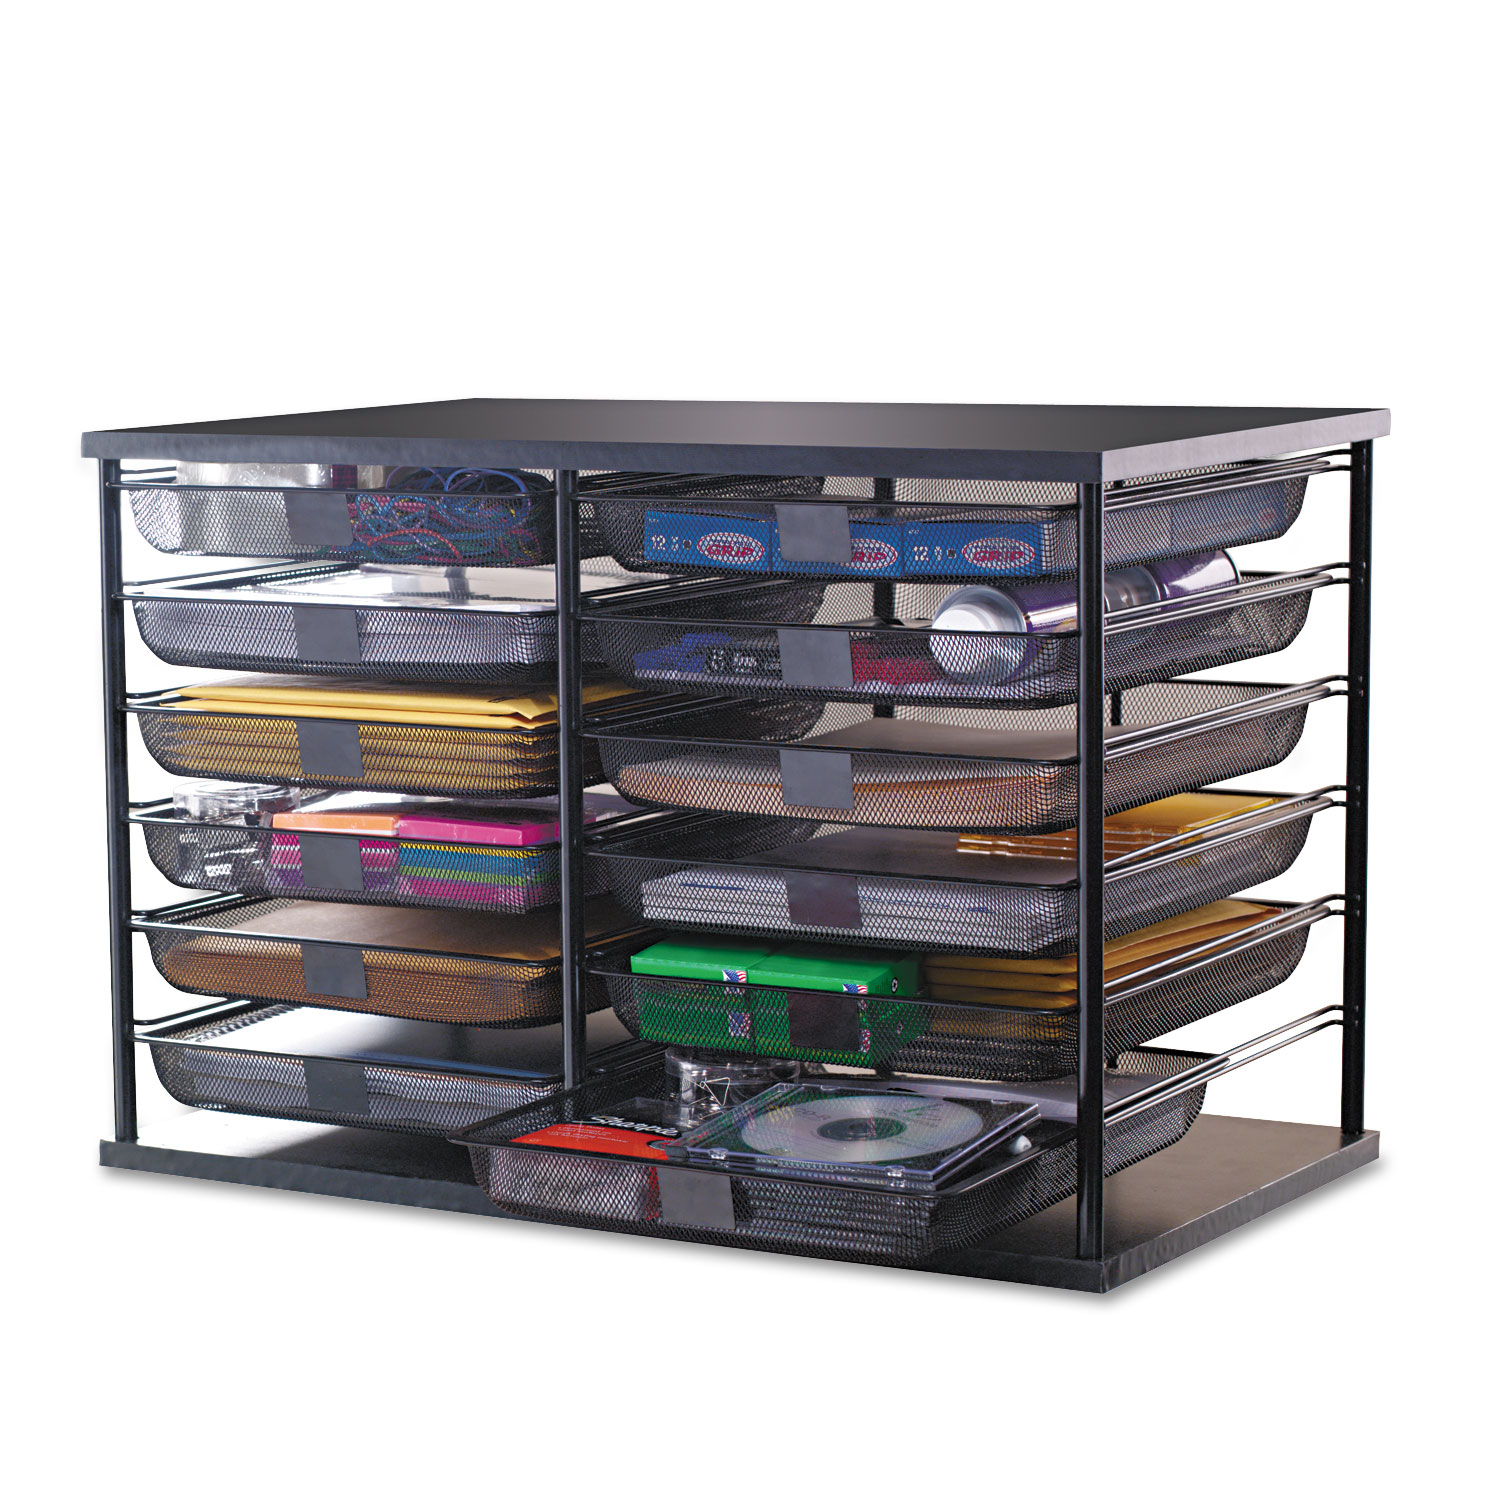 12-Compartment Organizer with Mesh Drawers, 23 4/5 x 15 9/10 x 15 2/5, Black